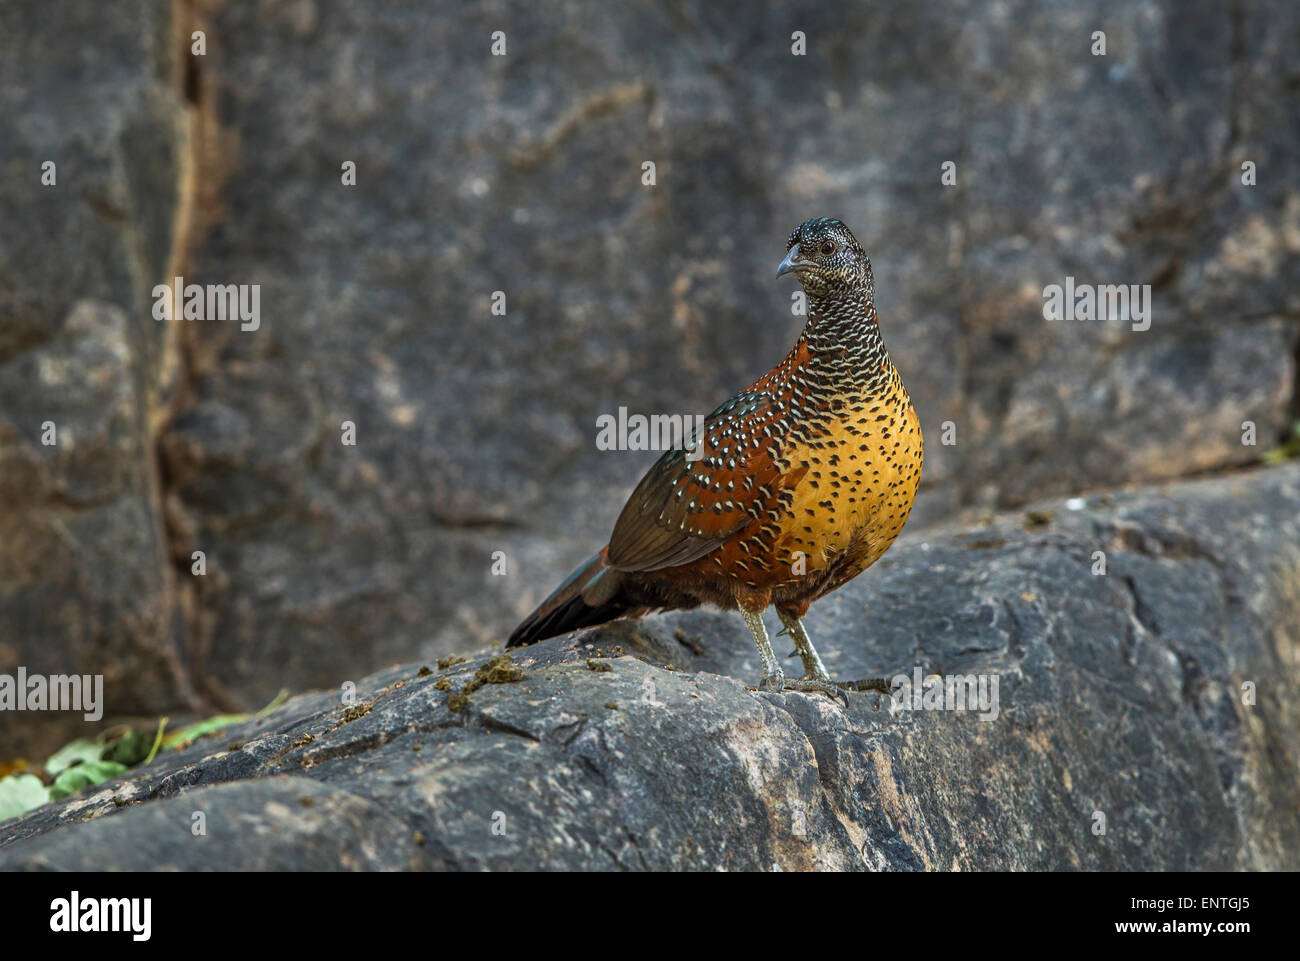 The painted spurfowl [Galloperdix lunulata] on a rocky hill at Ranthambhore Forest, India. Stock Photo